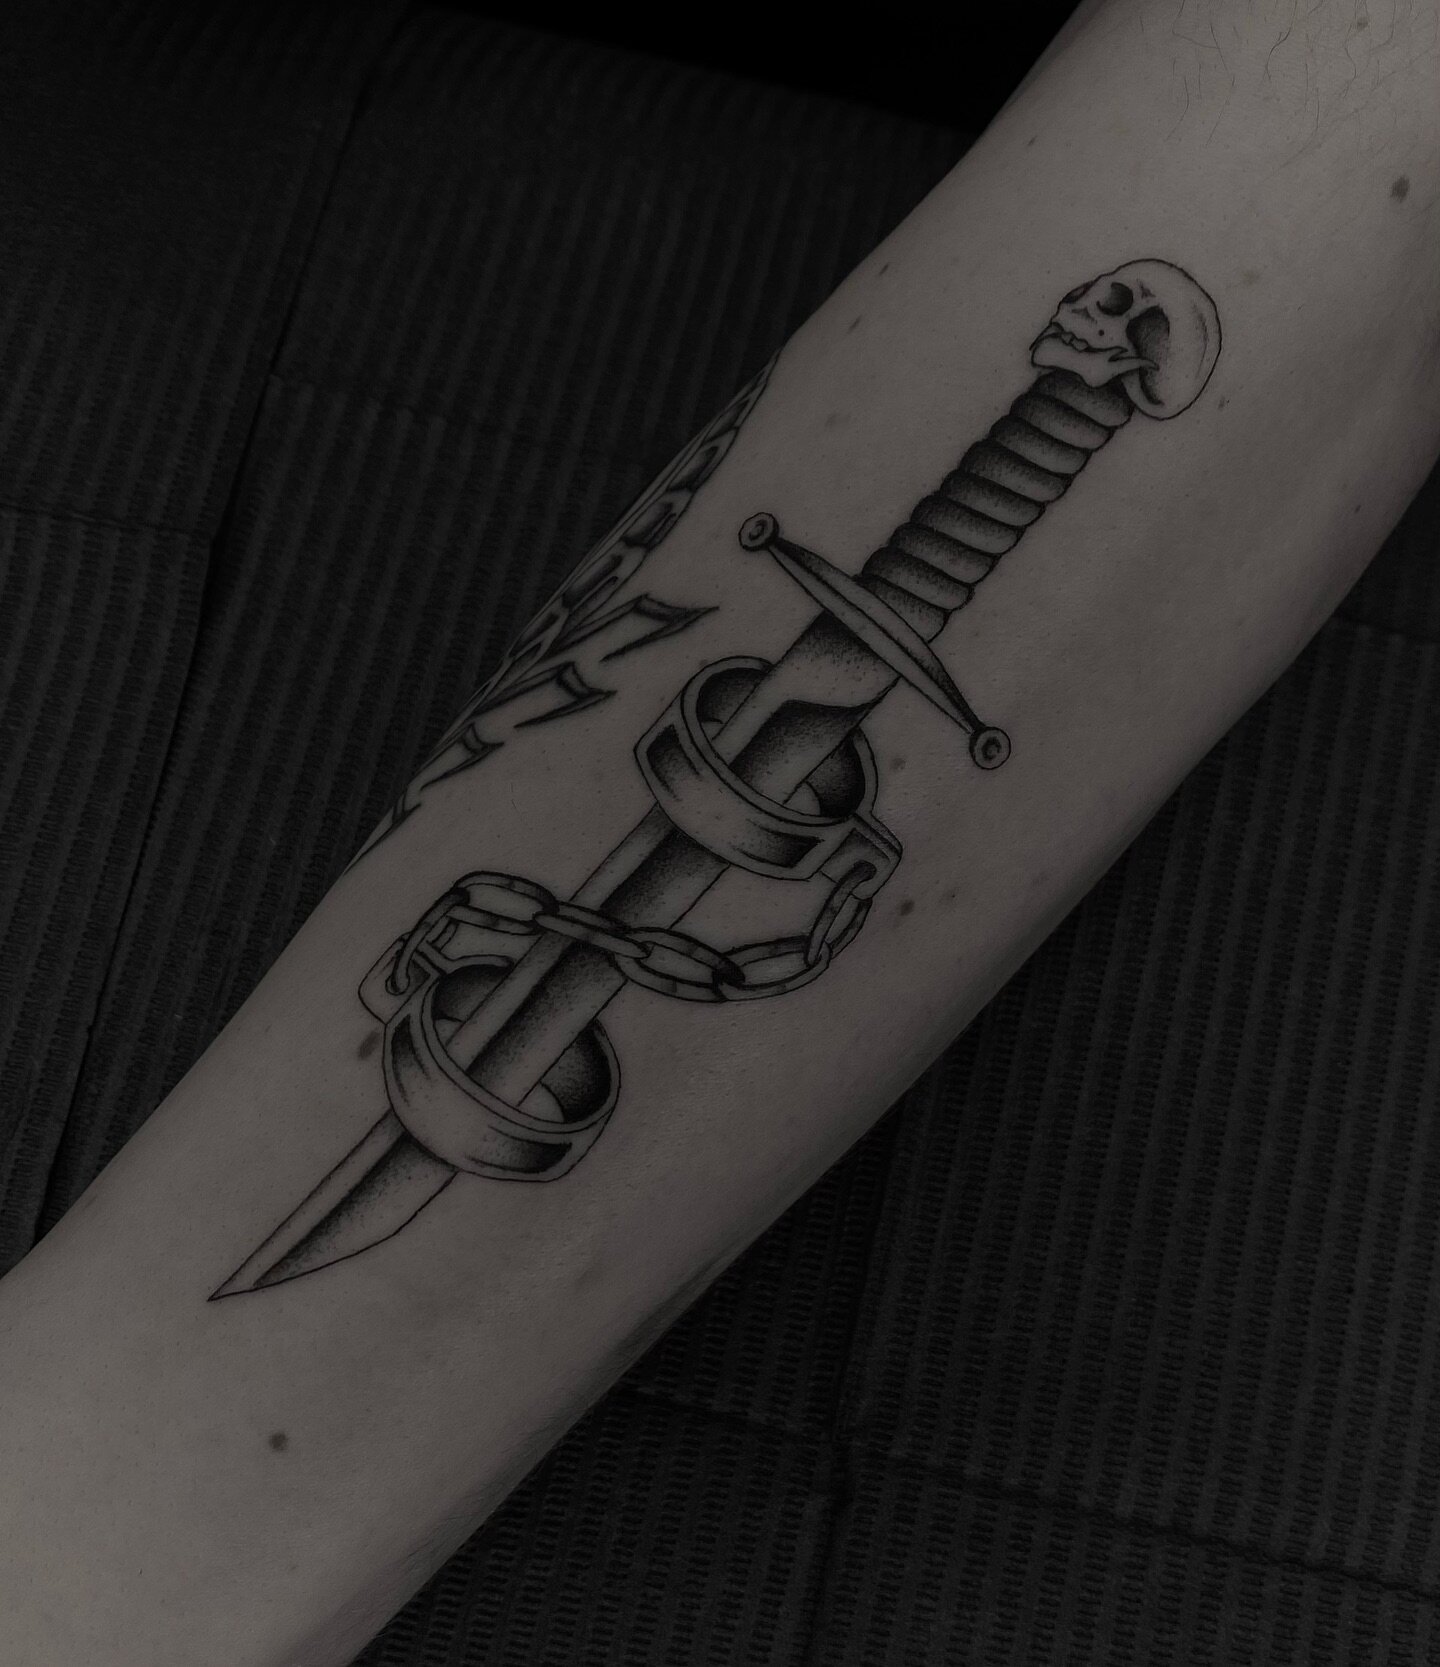 Live by the sword.. one from my flash for Jay. Will tattoo this all day every day. 
Booking February, DM or email me at outsidertattooing@gmail.com. My design or yours..